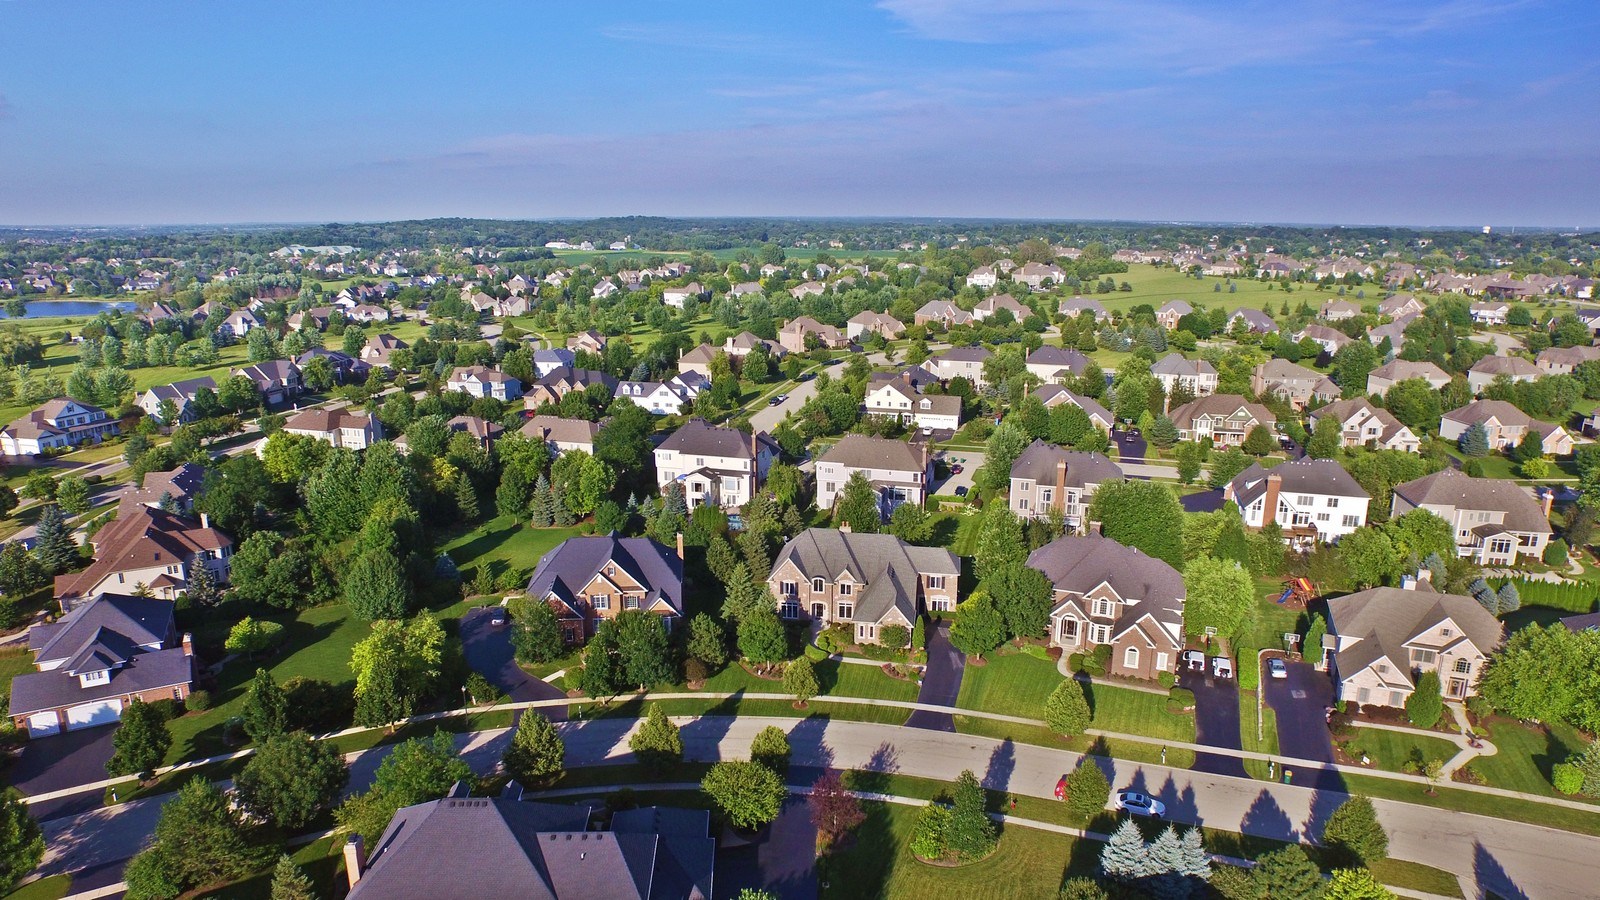 VHT Studios' aerial drone photography and video provide potential buyers with stunning rooftop views of homes and communities.